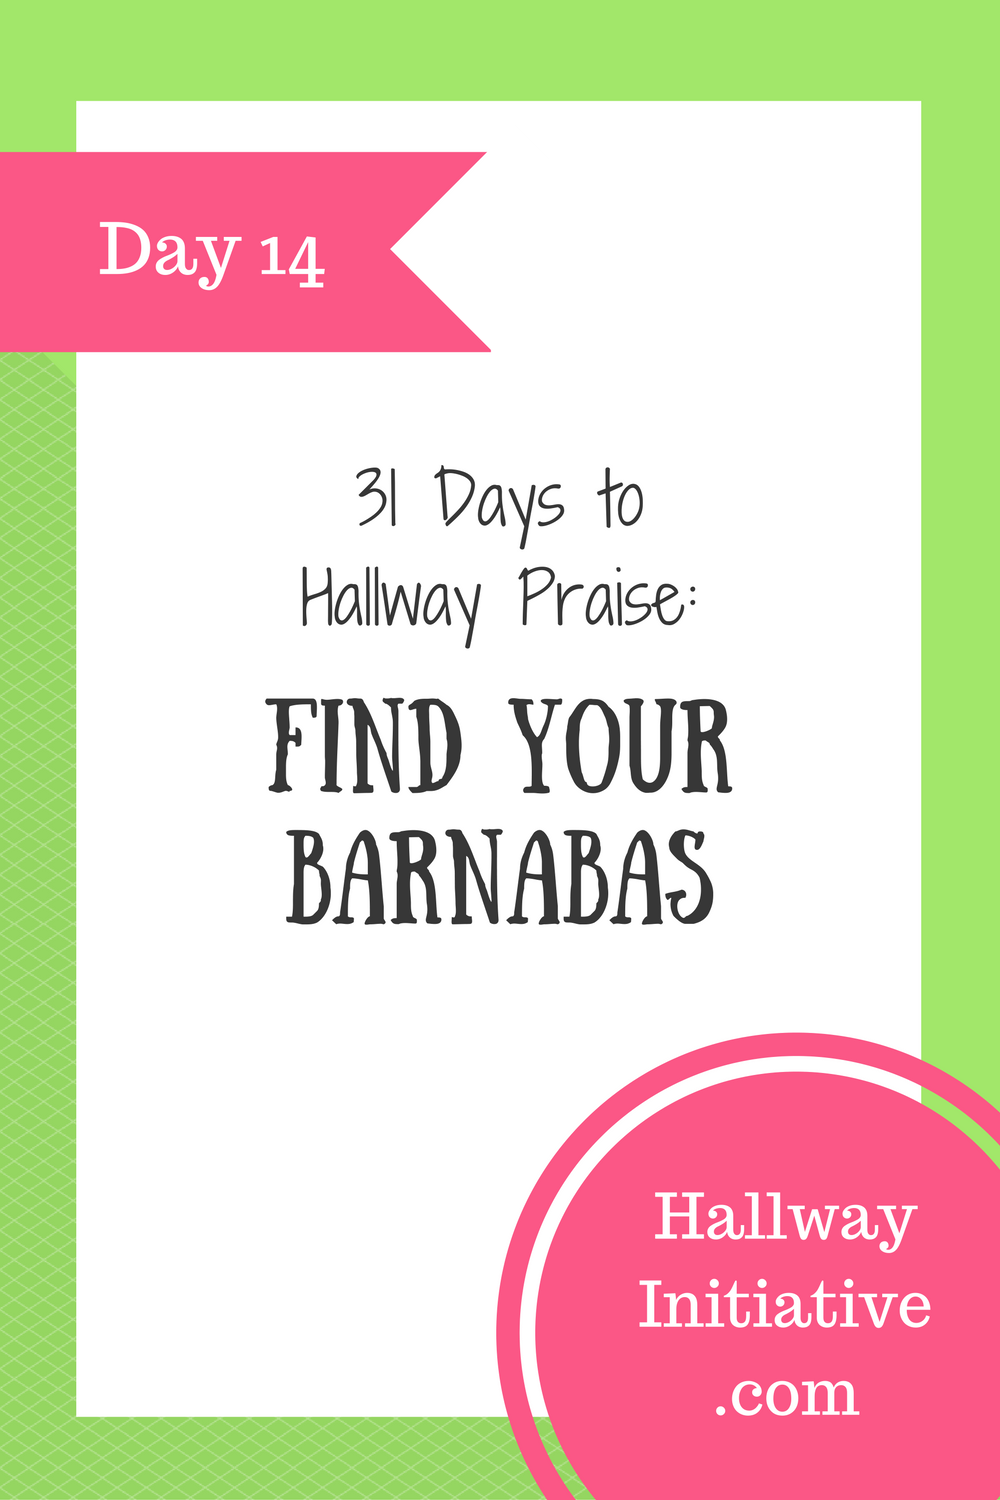 Day 14: find your Barnabas